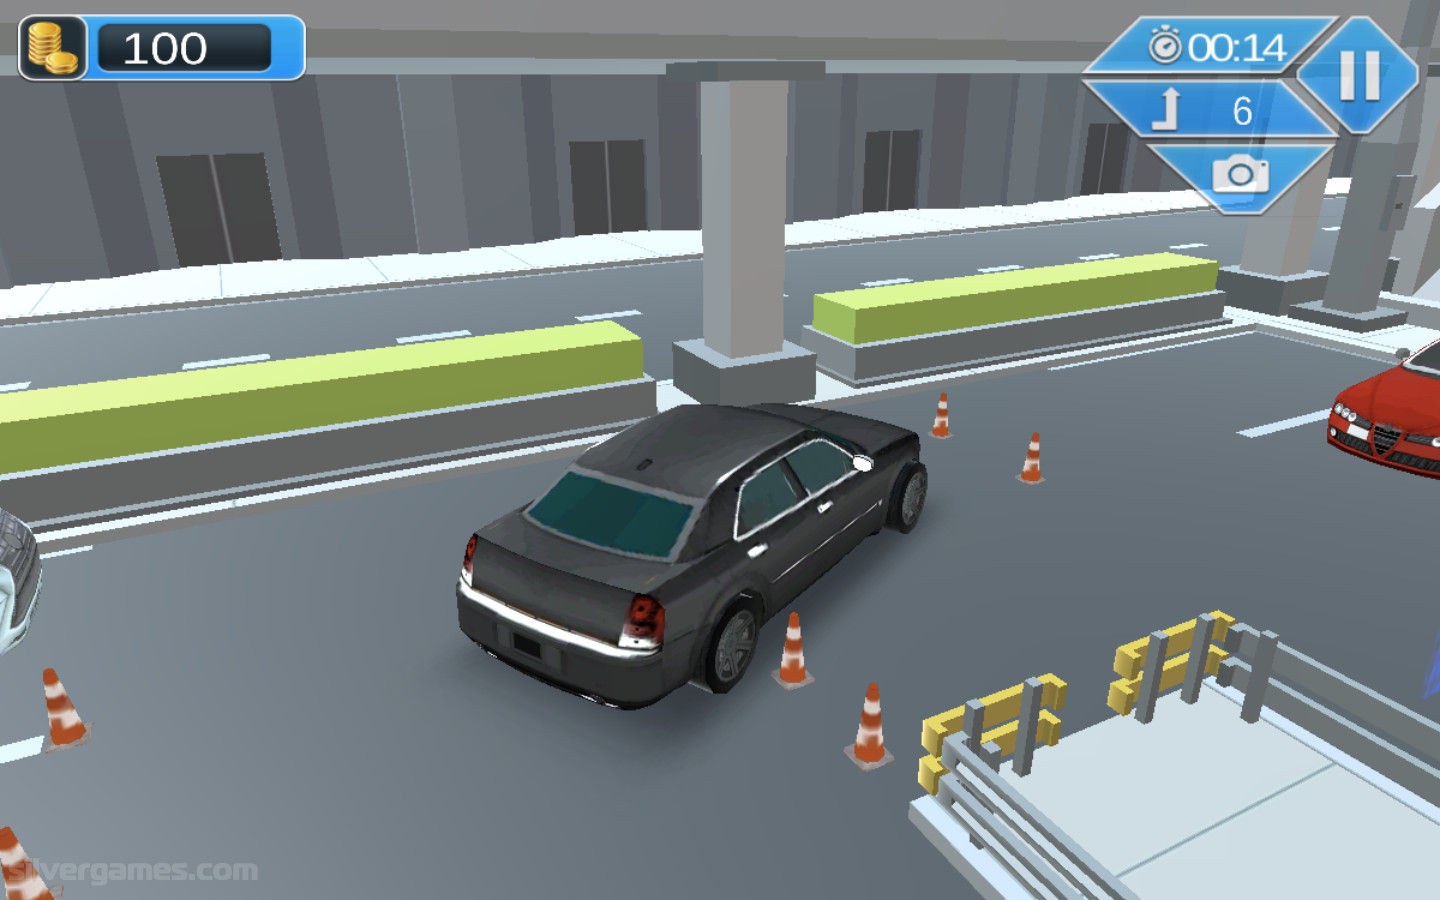 Car Parking: Play Car Parking for free on LittleGames